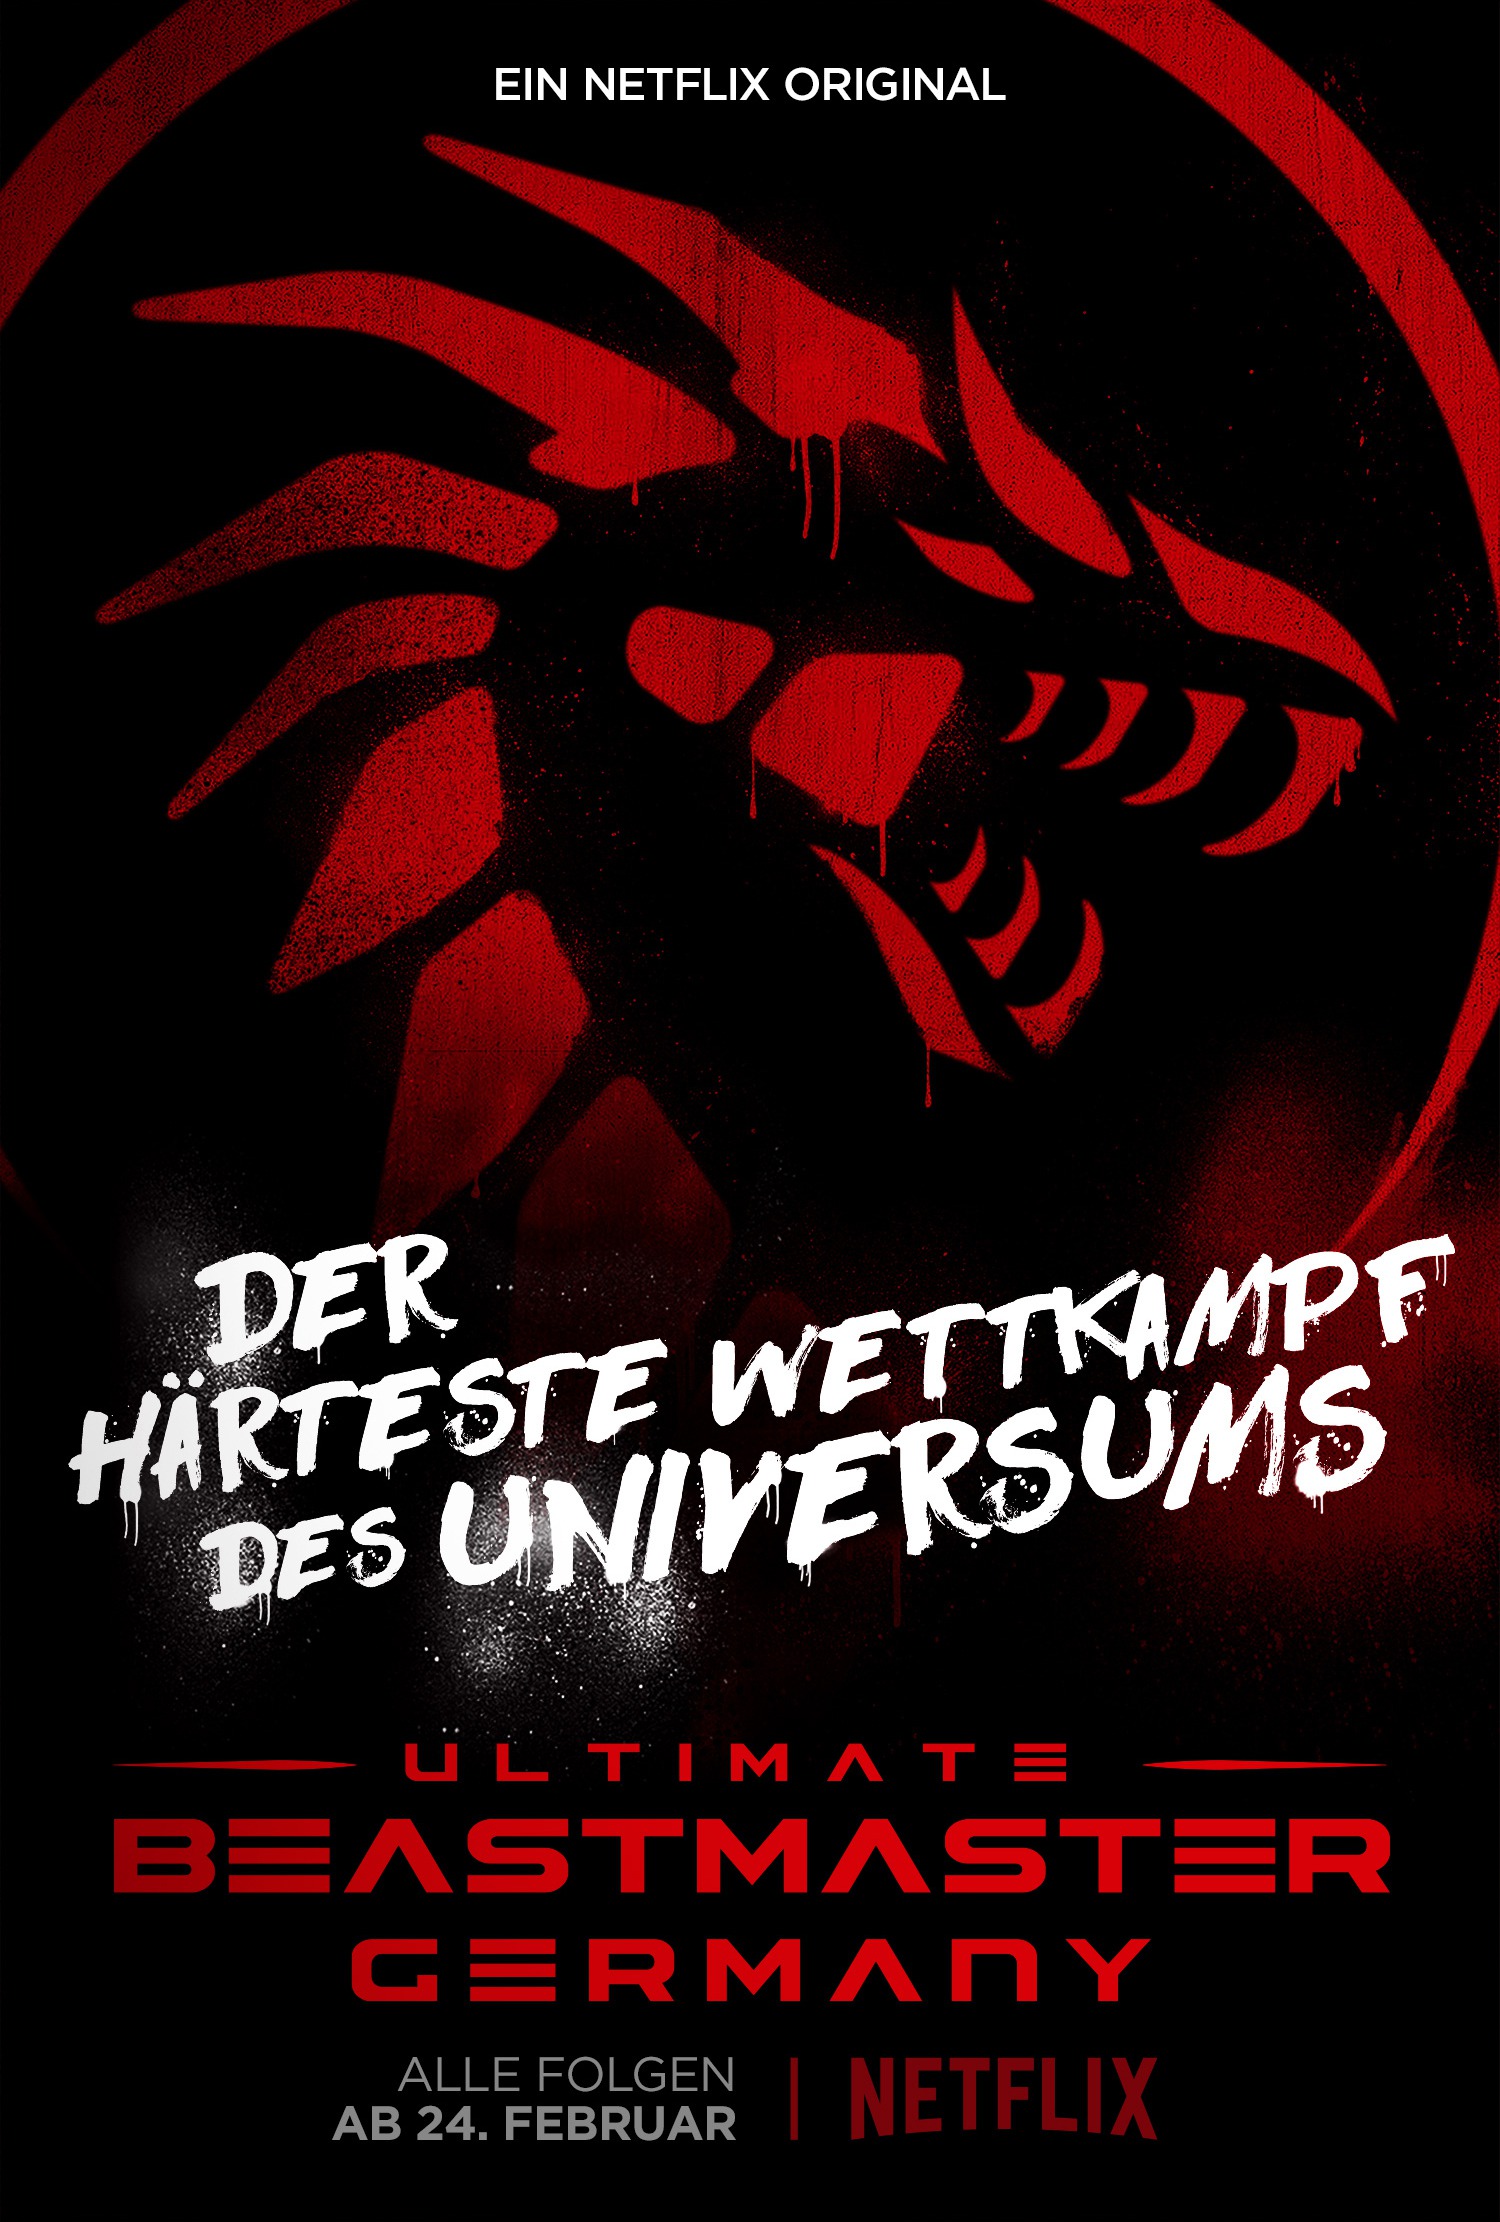 Mega Sized TV Poster Image for Ultimate Beastmaster (#2 of 2)